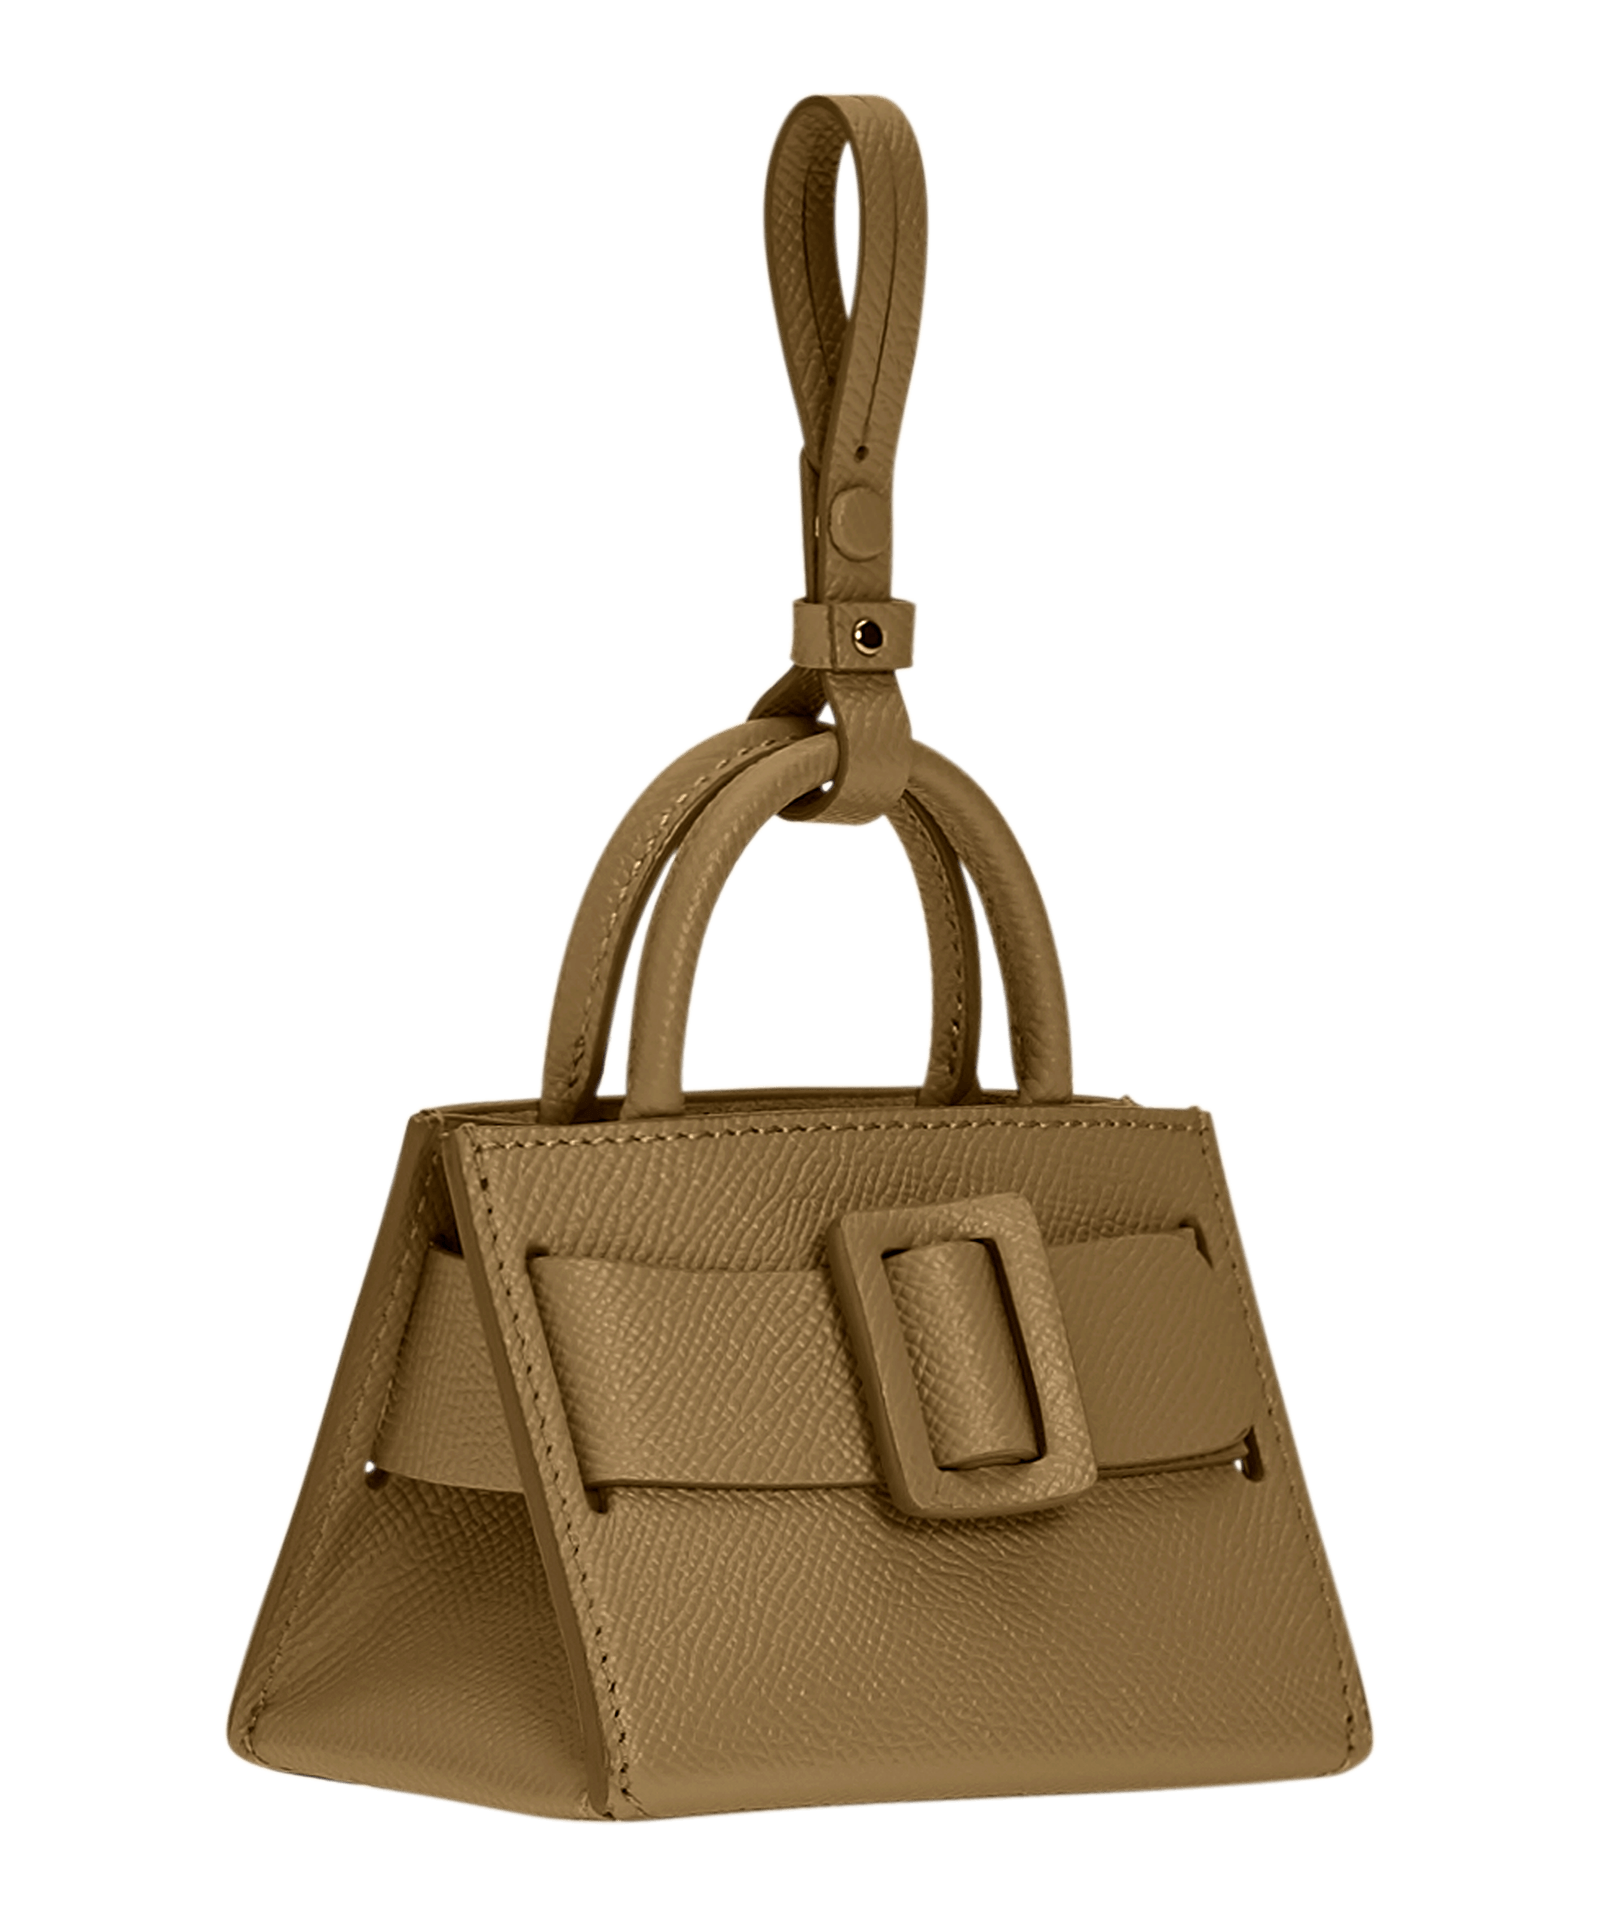 Miniature structured brown handbag charm with a leather buckle on the front, carry strap, and twin handles. Made with grained calfskin leather.